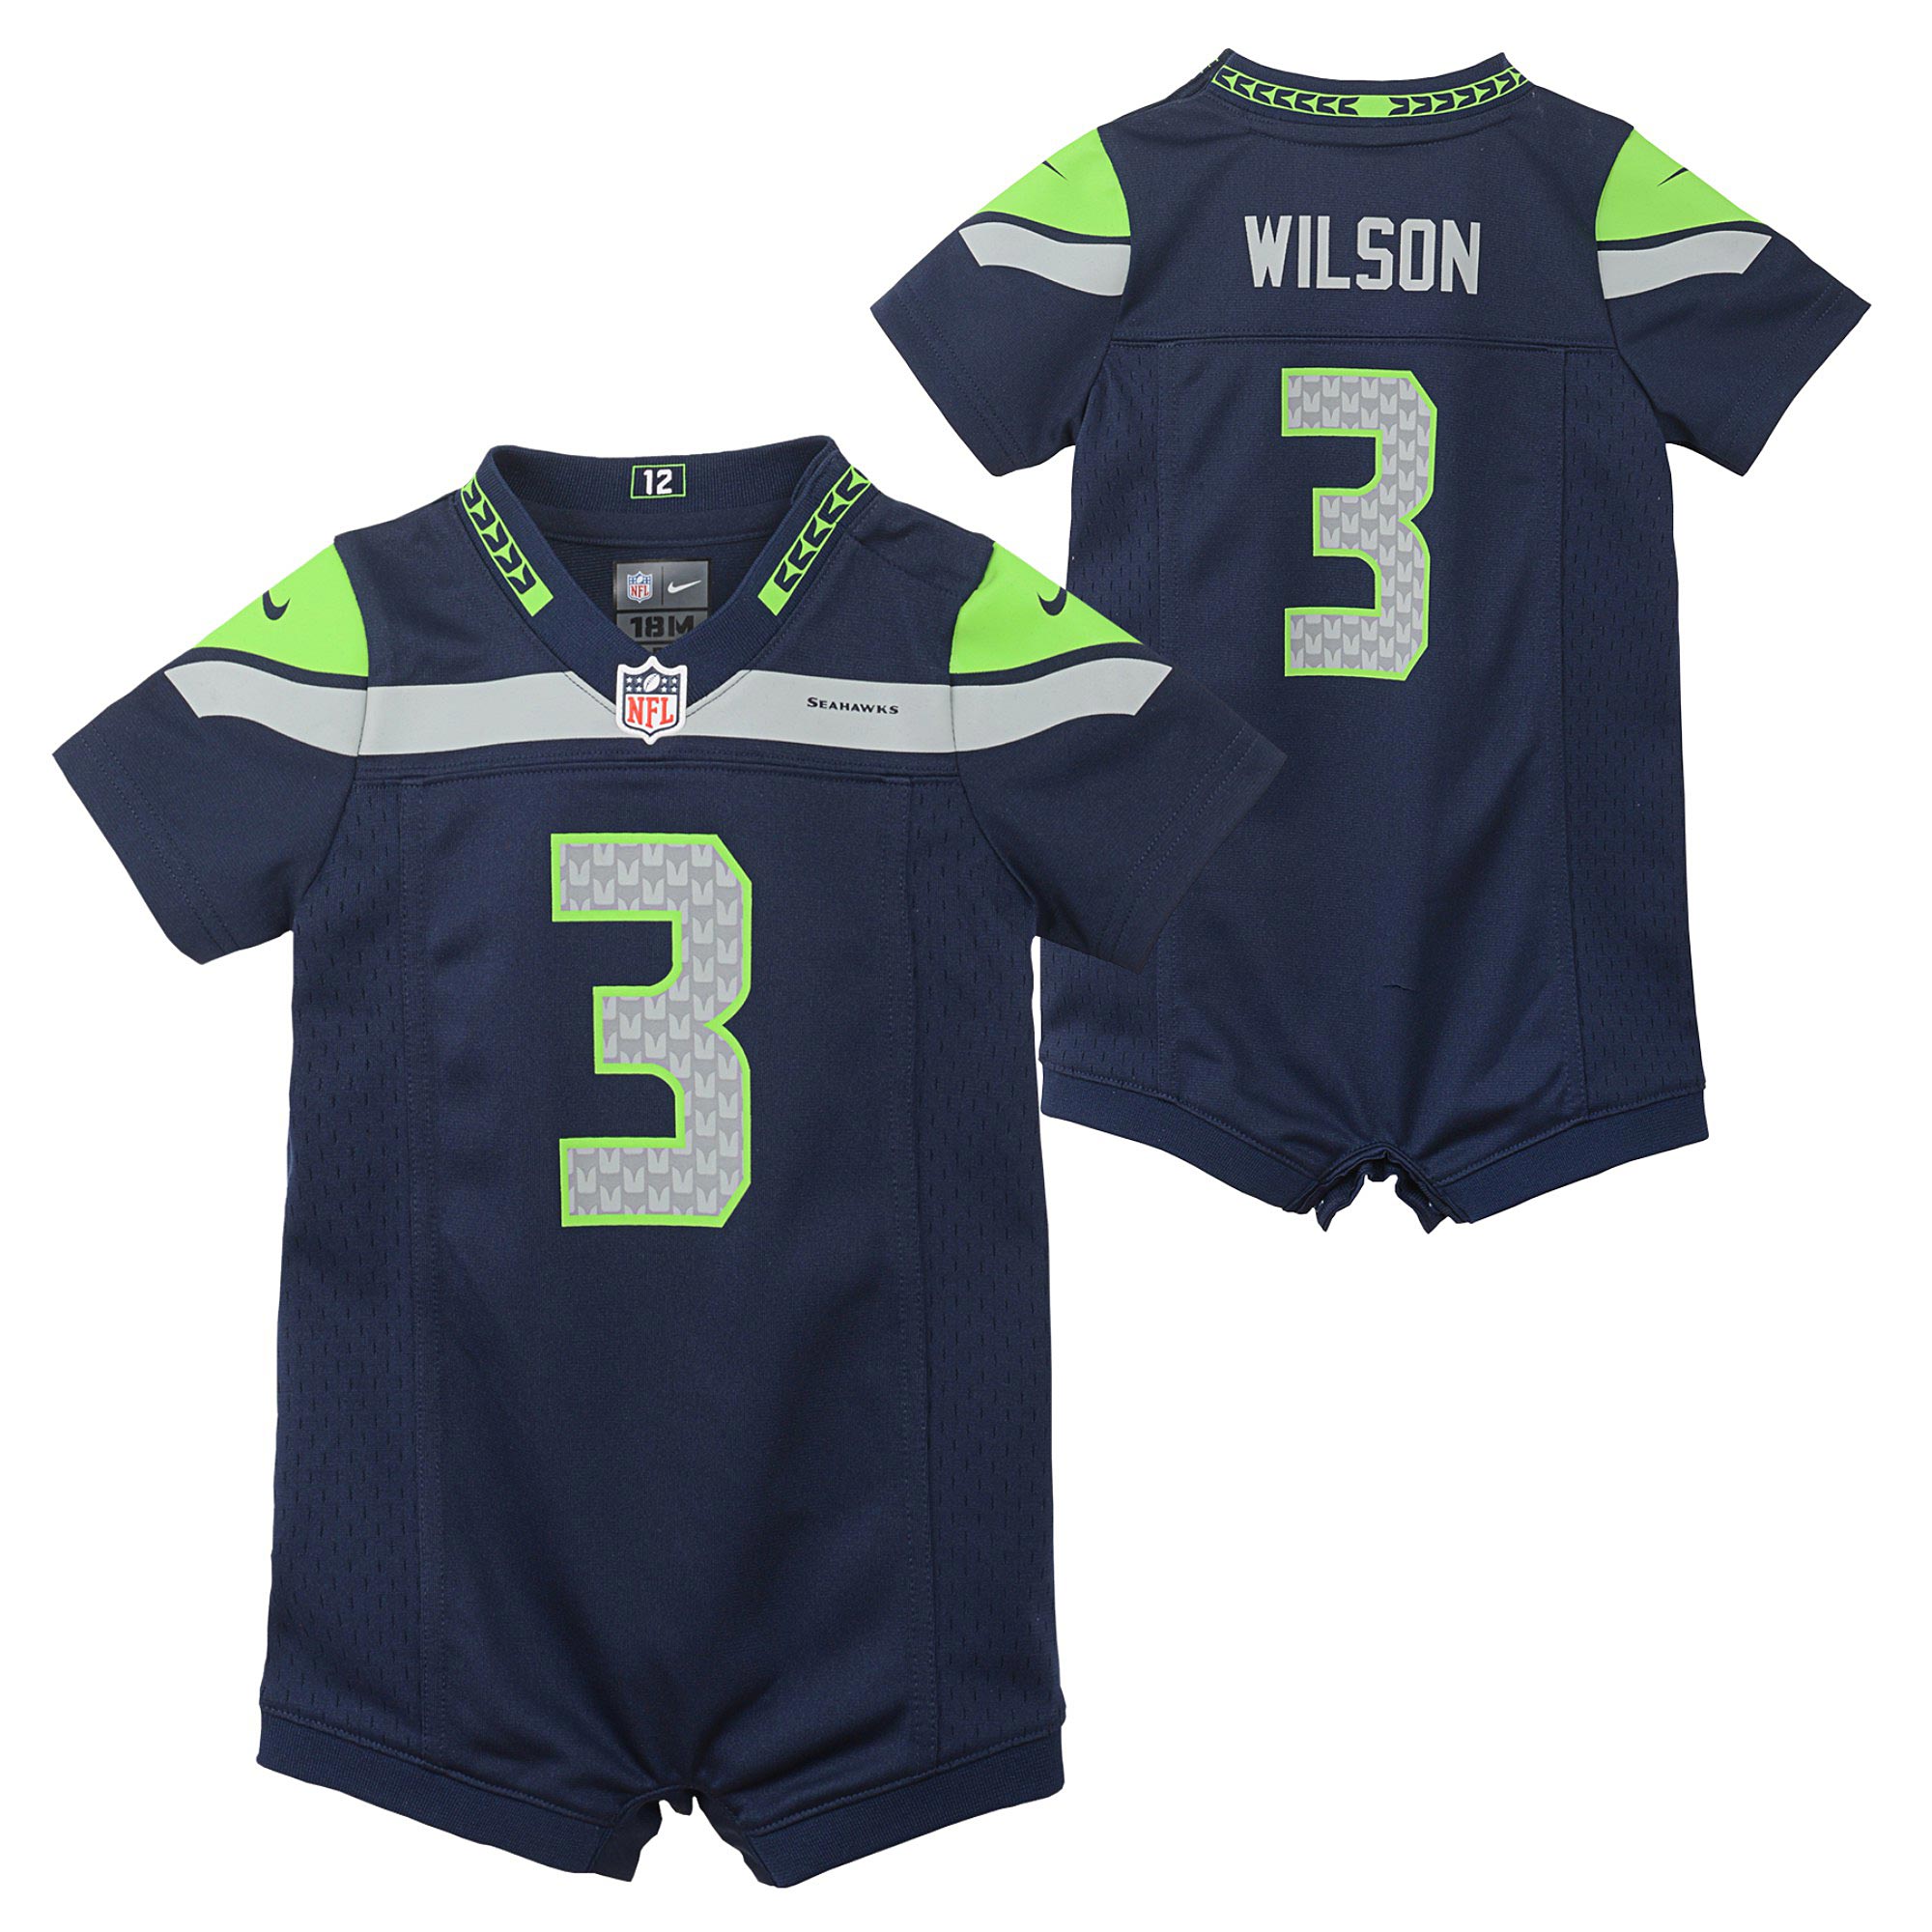 russell wilson baby jersey